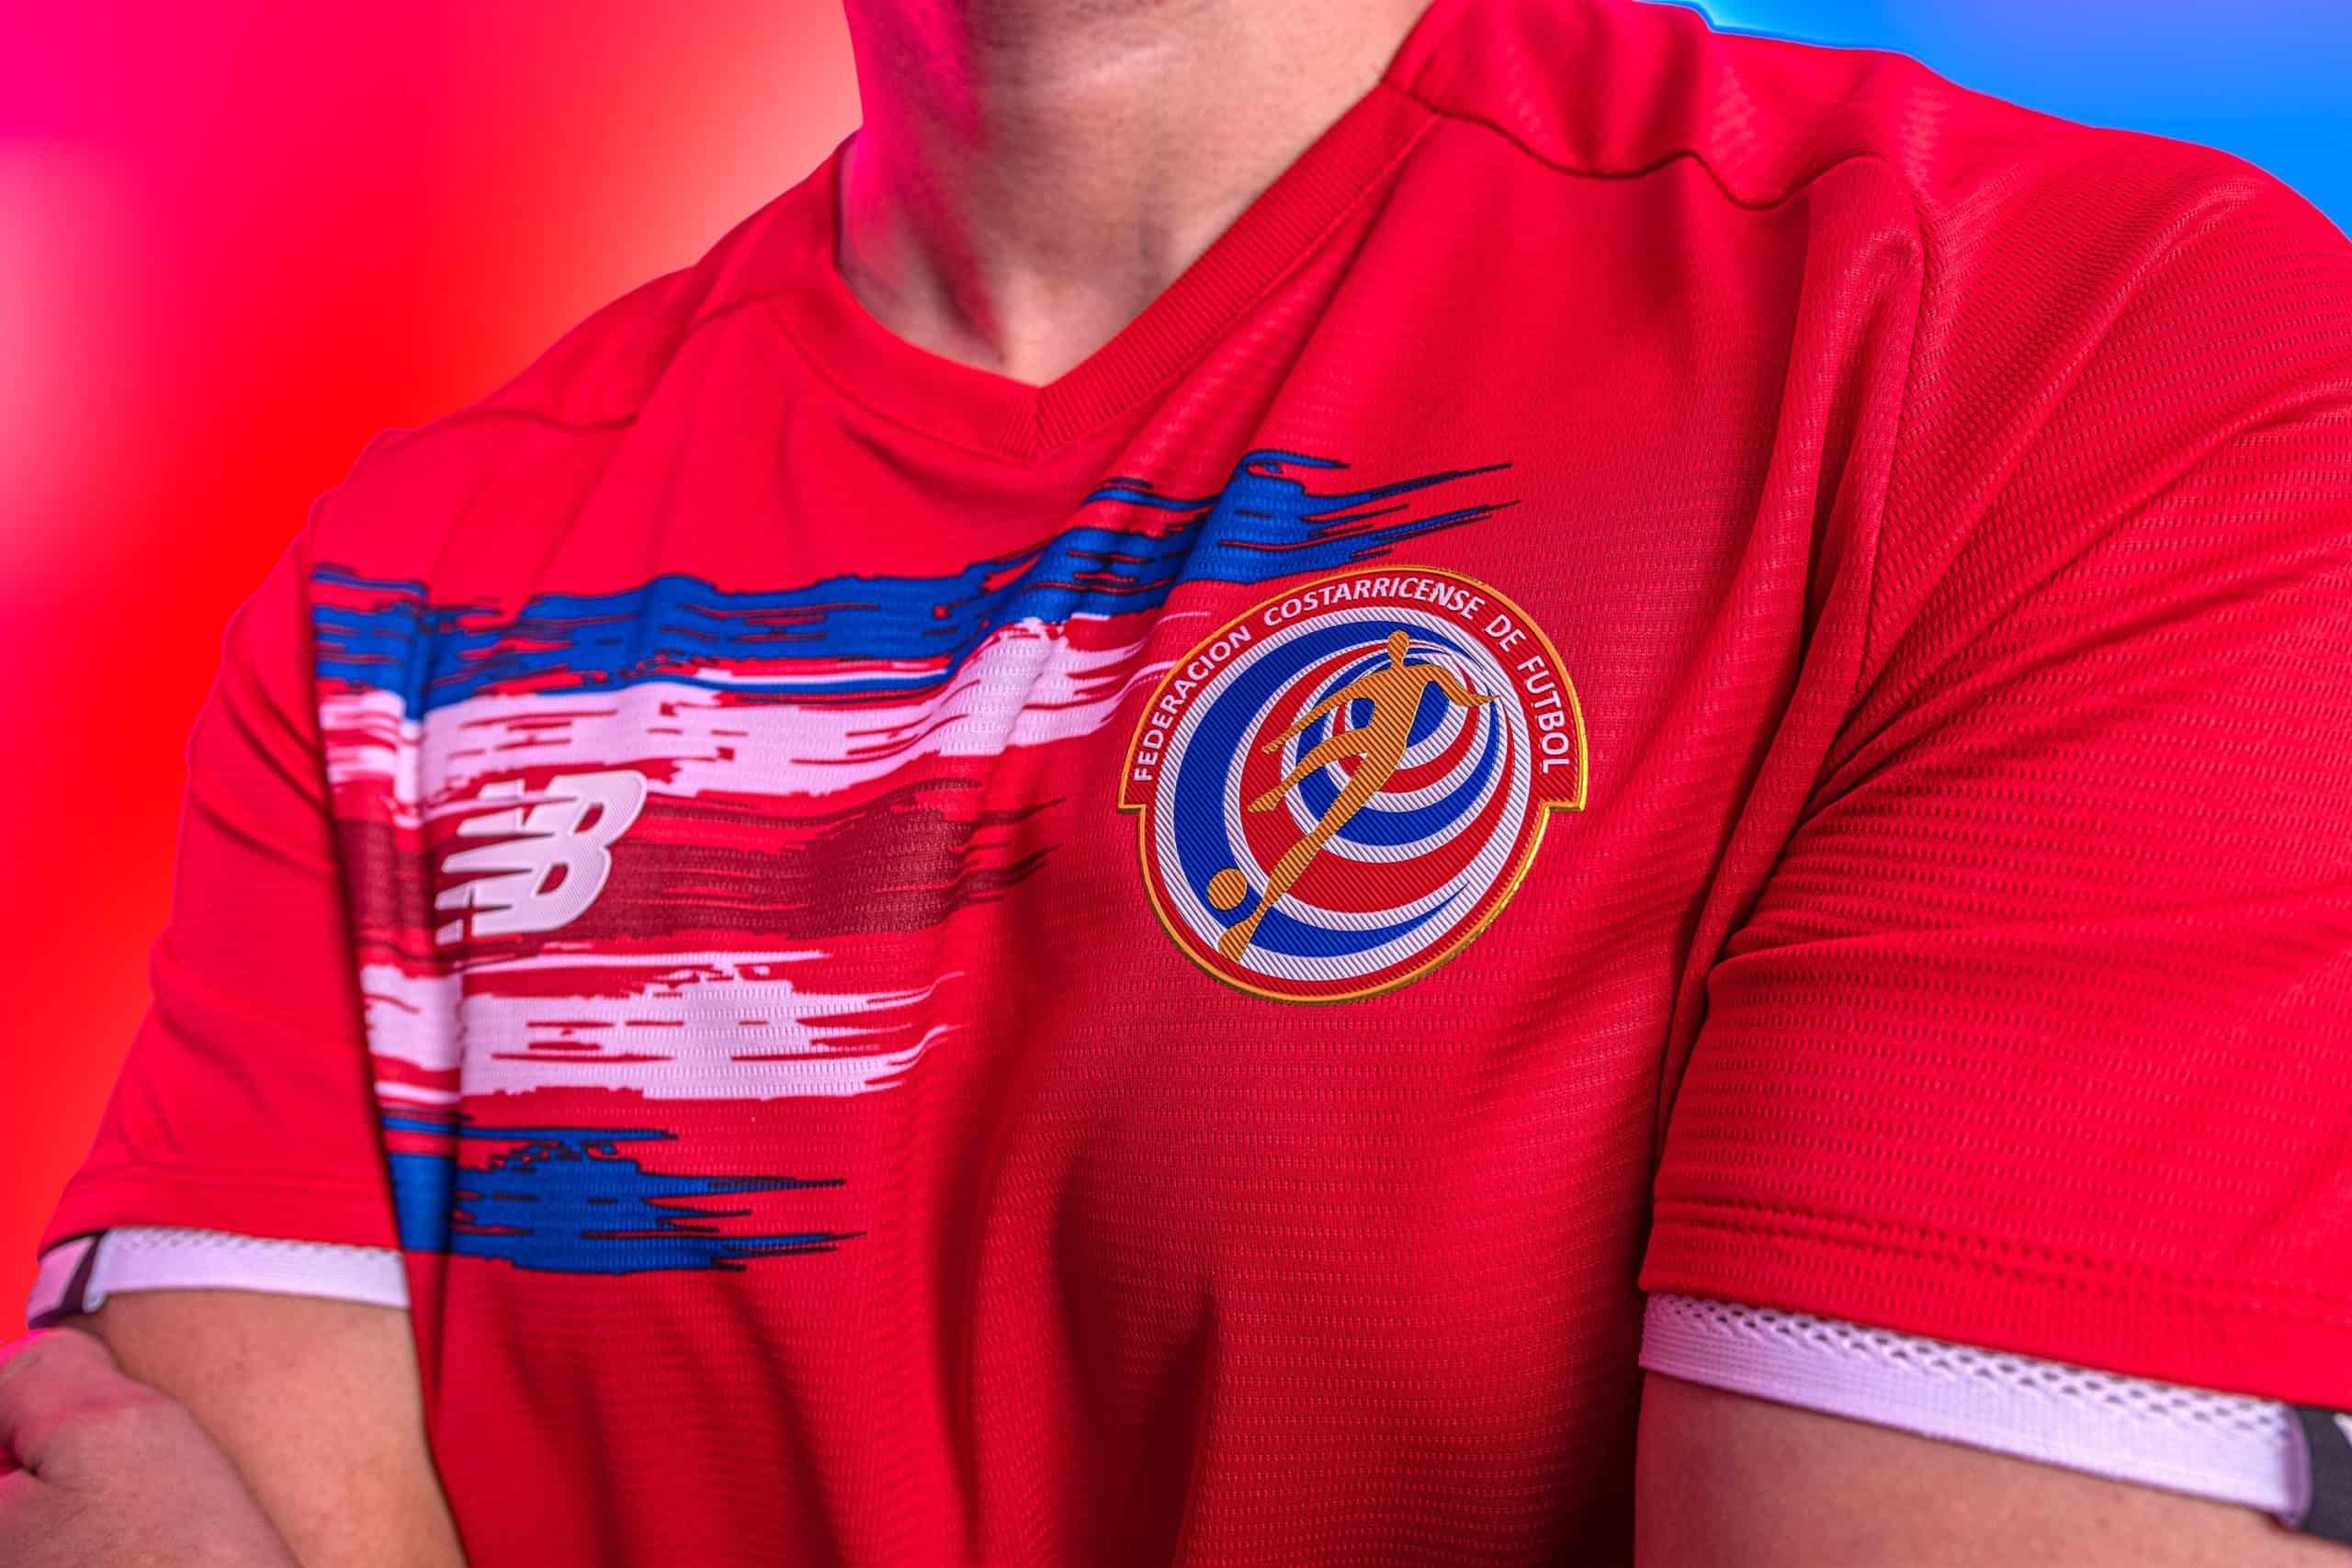 Costa Rica unveiled its new soccer kits on August 30, 2021.